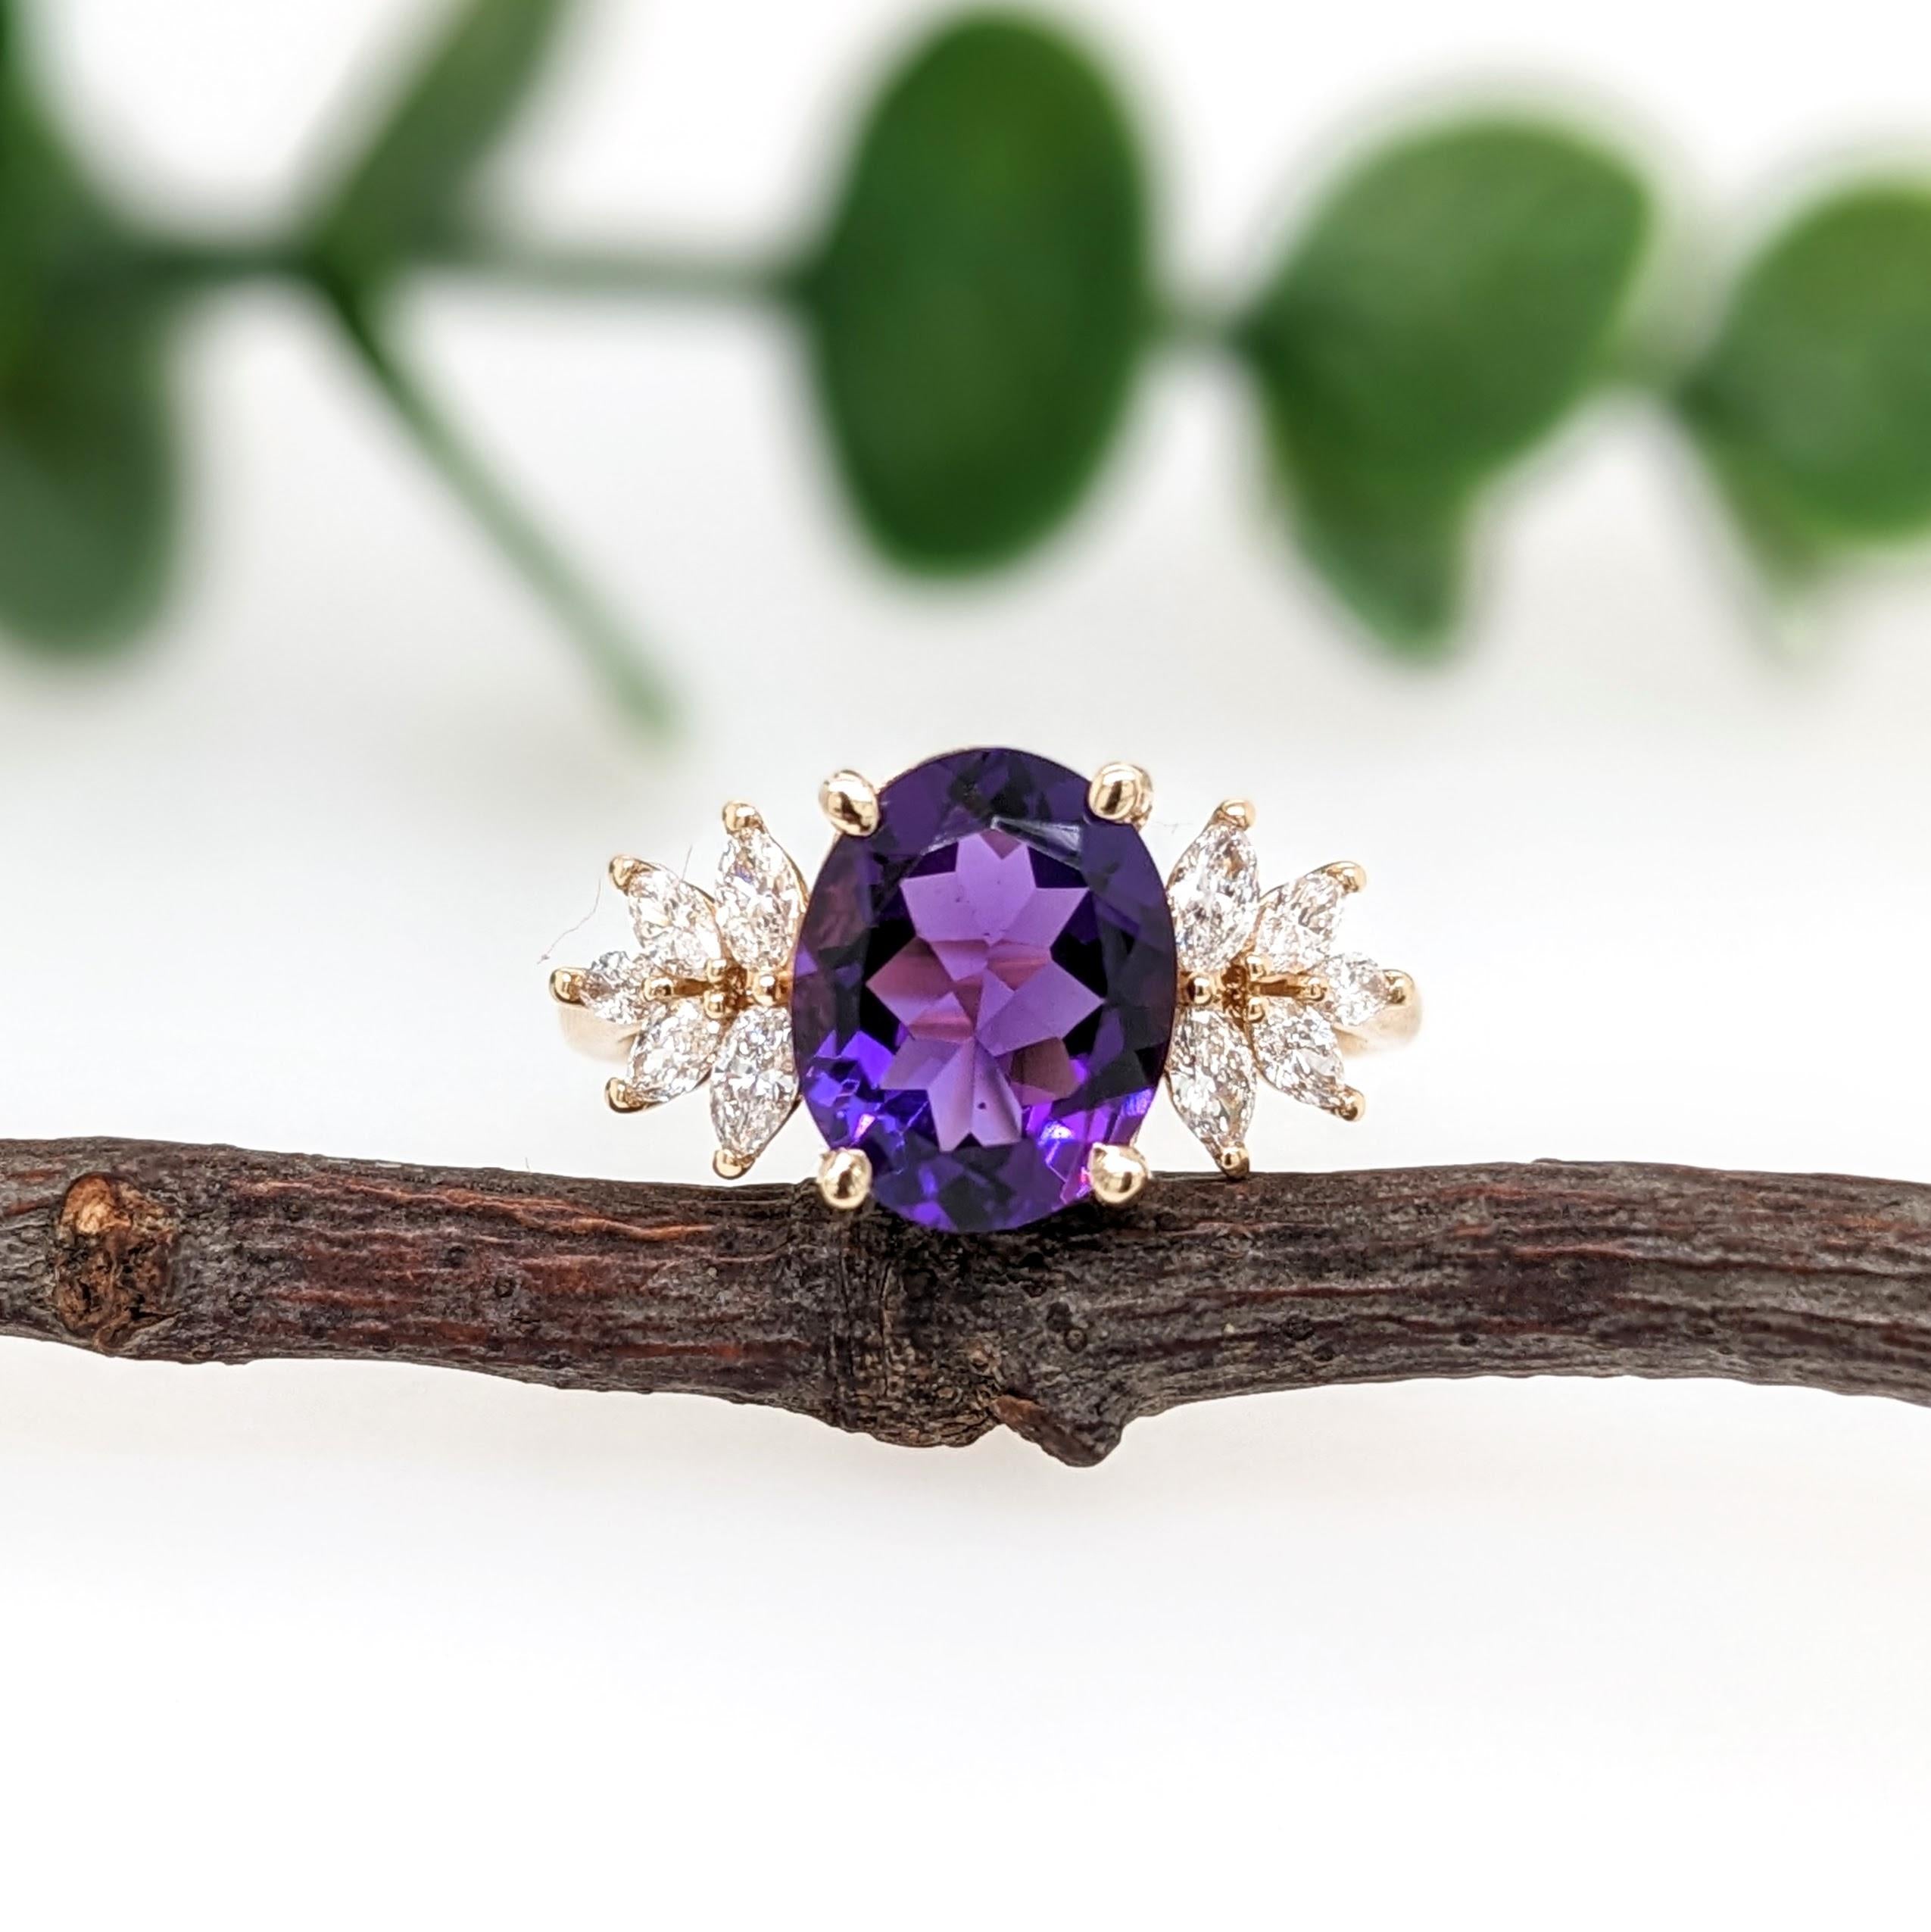 2.3ct Amethyst Ring w Natural Diamonds in Solid 14k Yellow Gold Oval 10x8mm